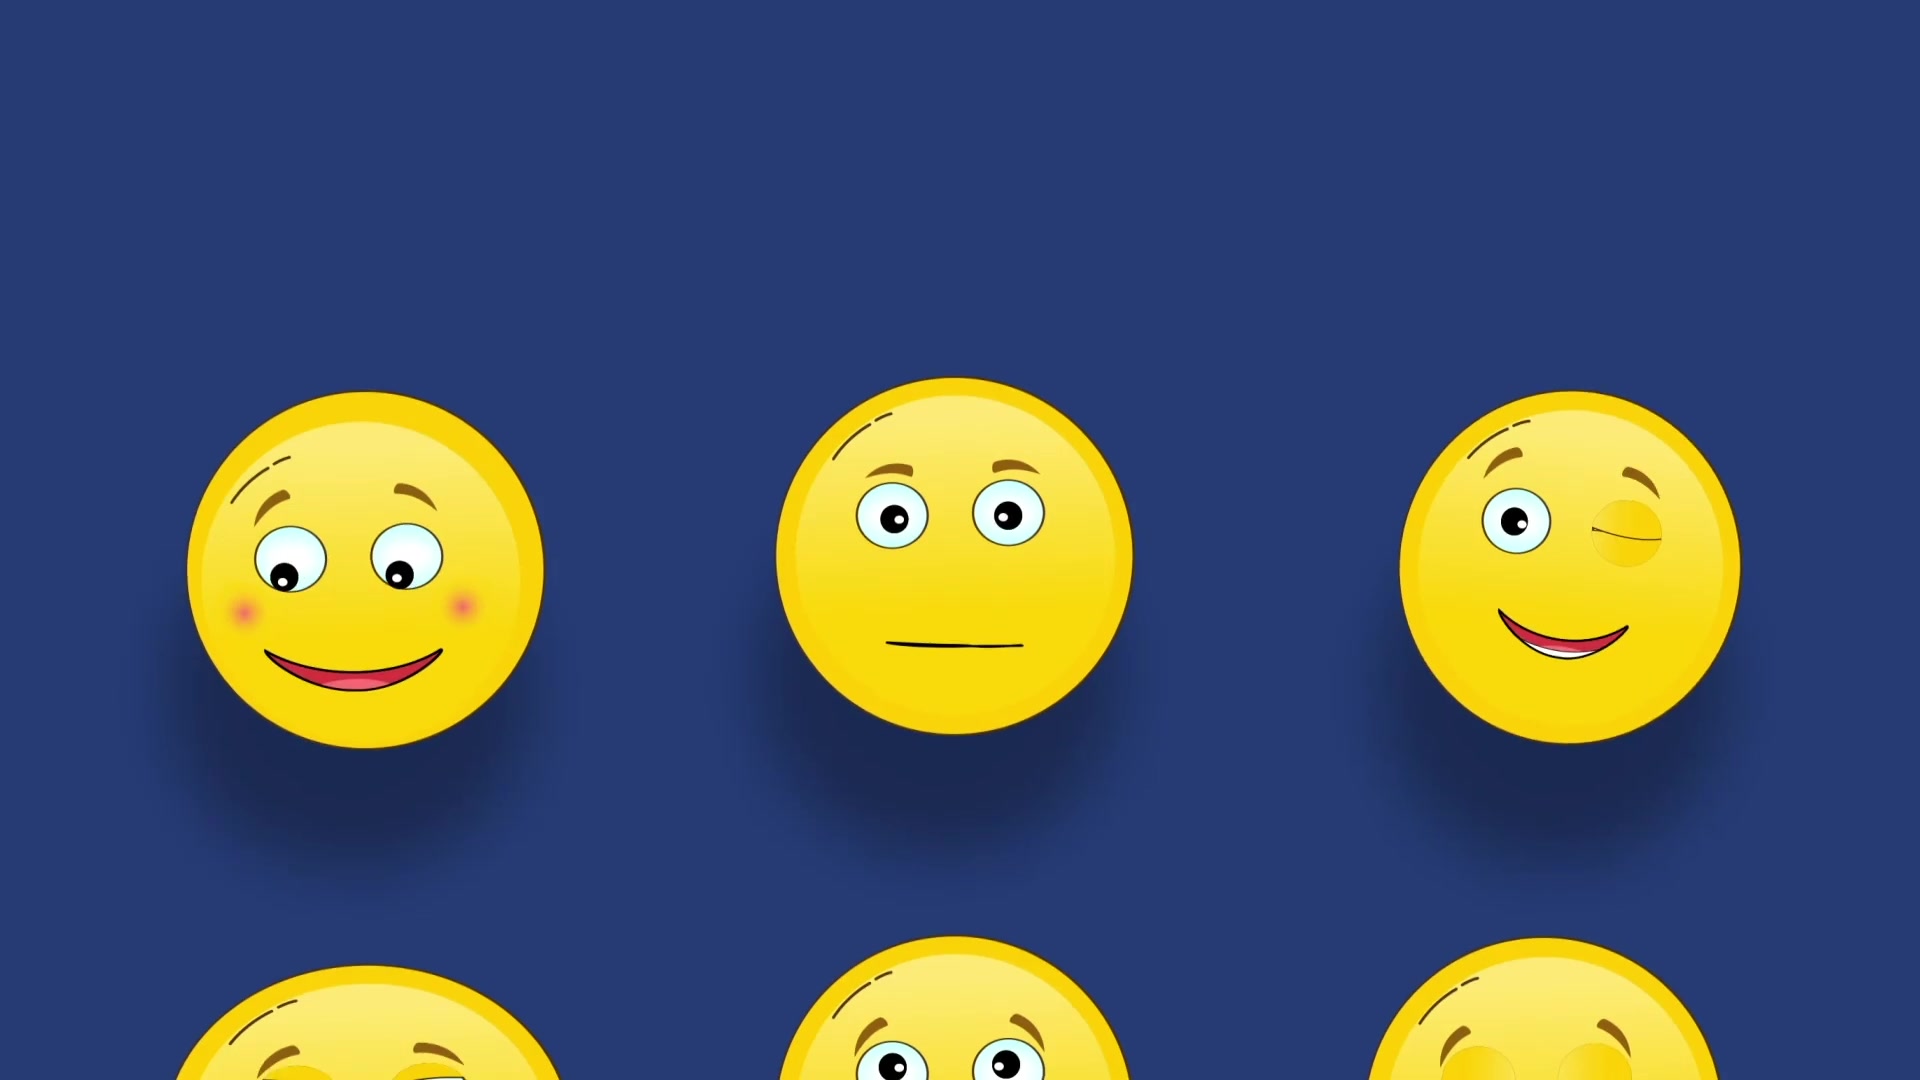 emoji animation after effects free download